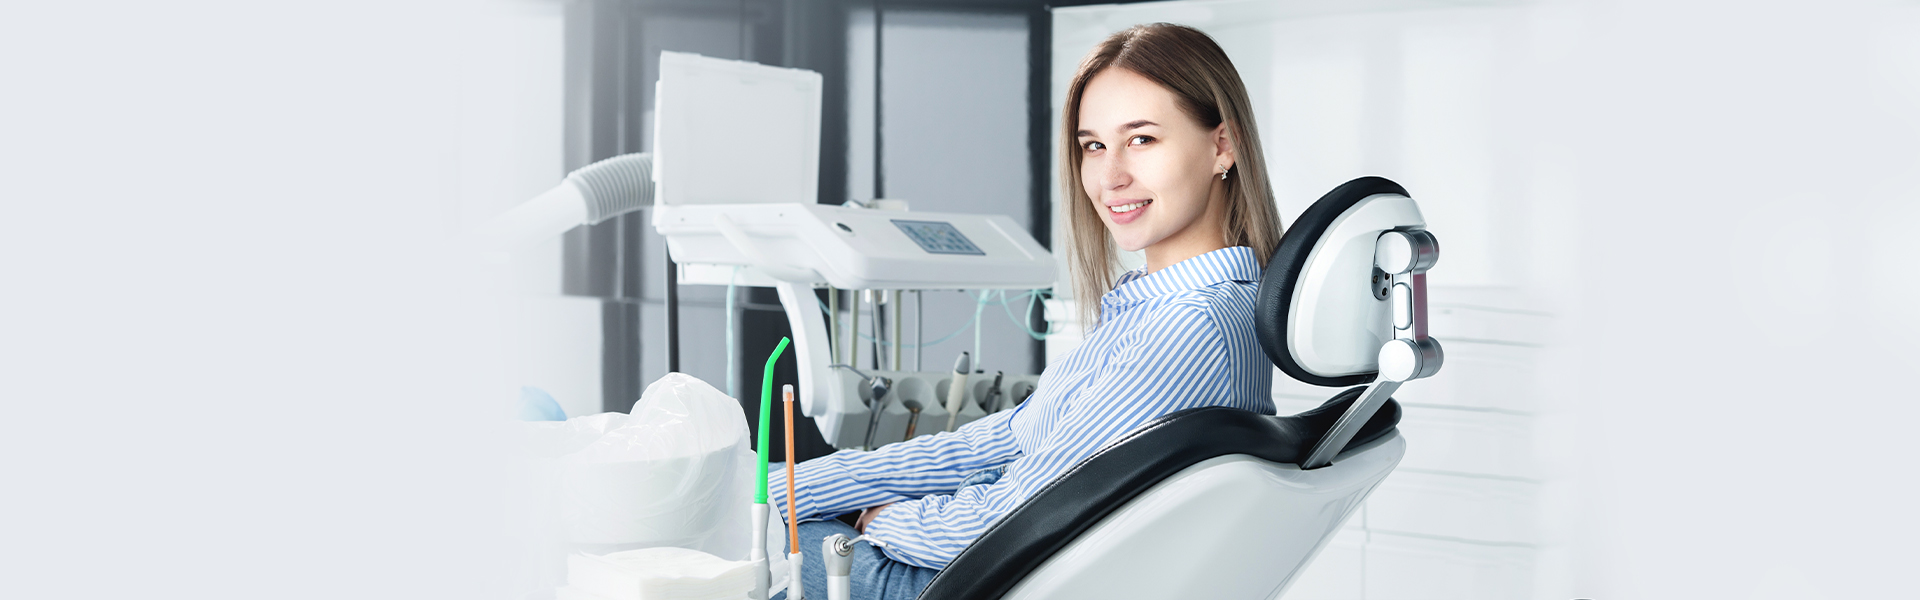 How Can I Keep a Healthy Smile in Between Checkups?